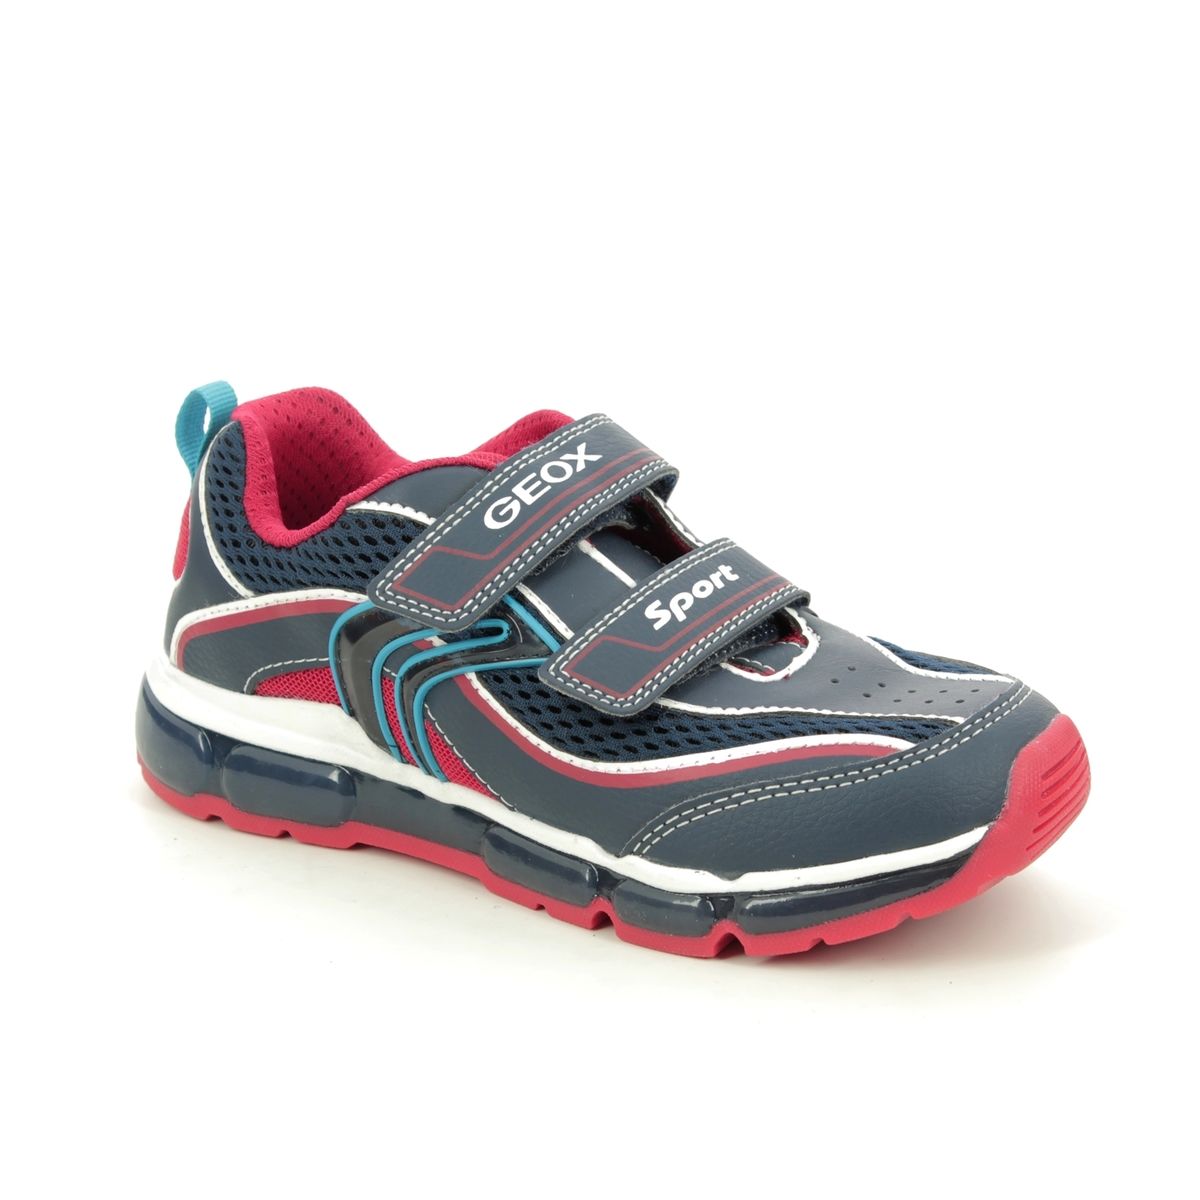 Geox Android Boy C Navy Red Kids Boys Trainers J0244C-C0735 in a Plain Man-made in Size 32